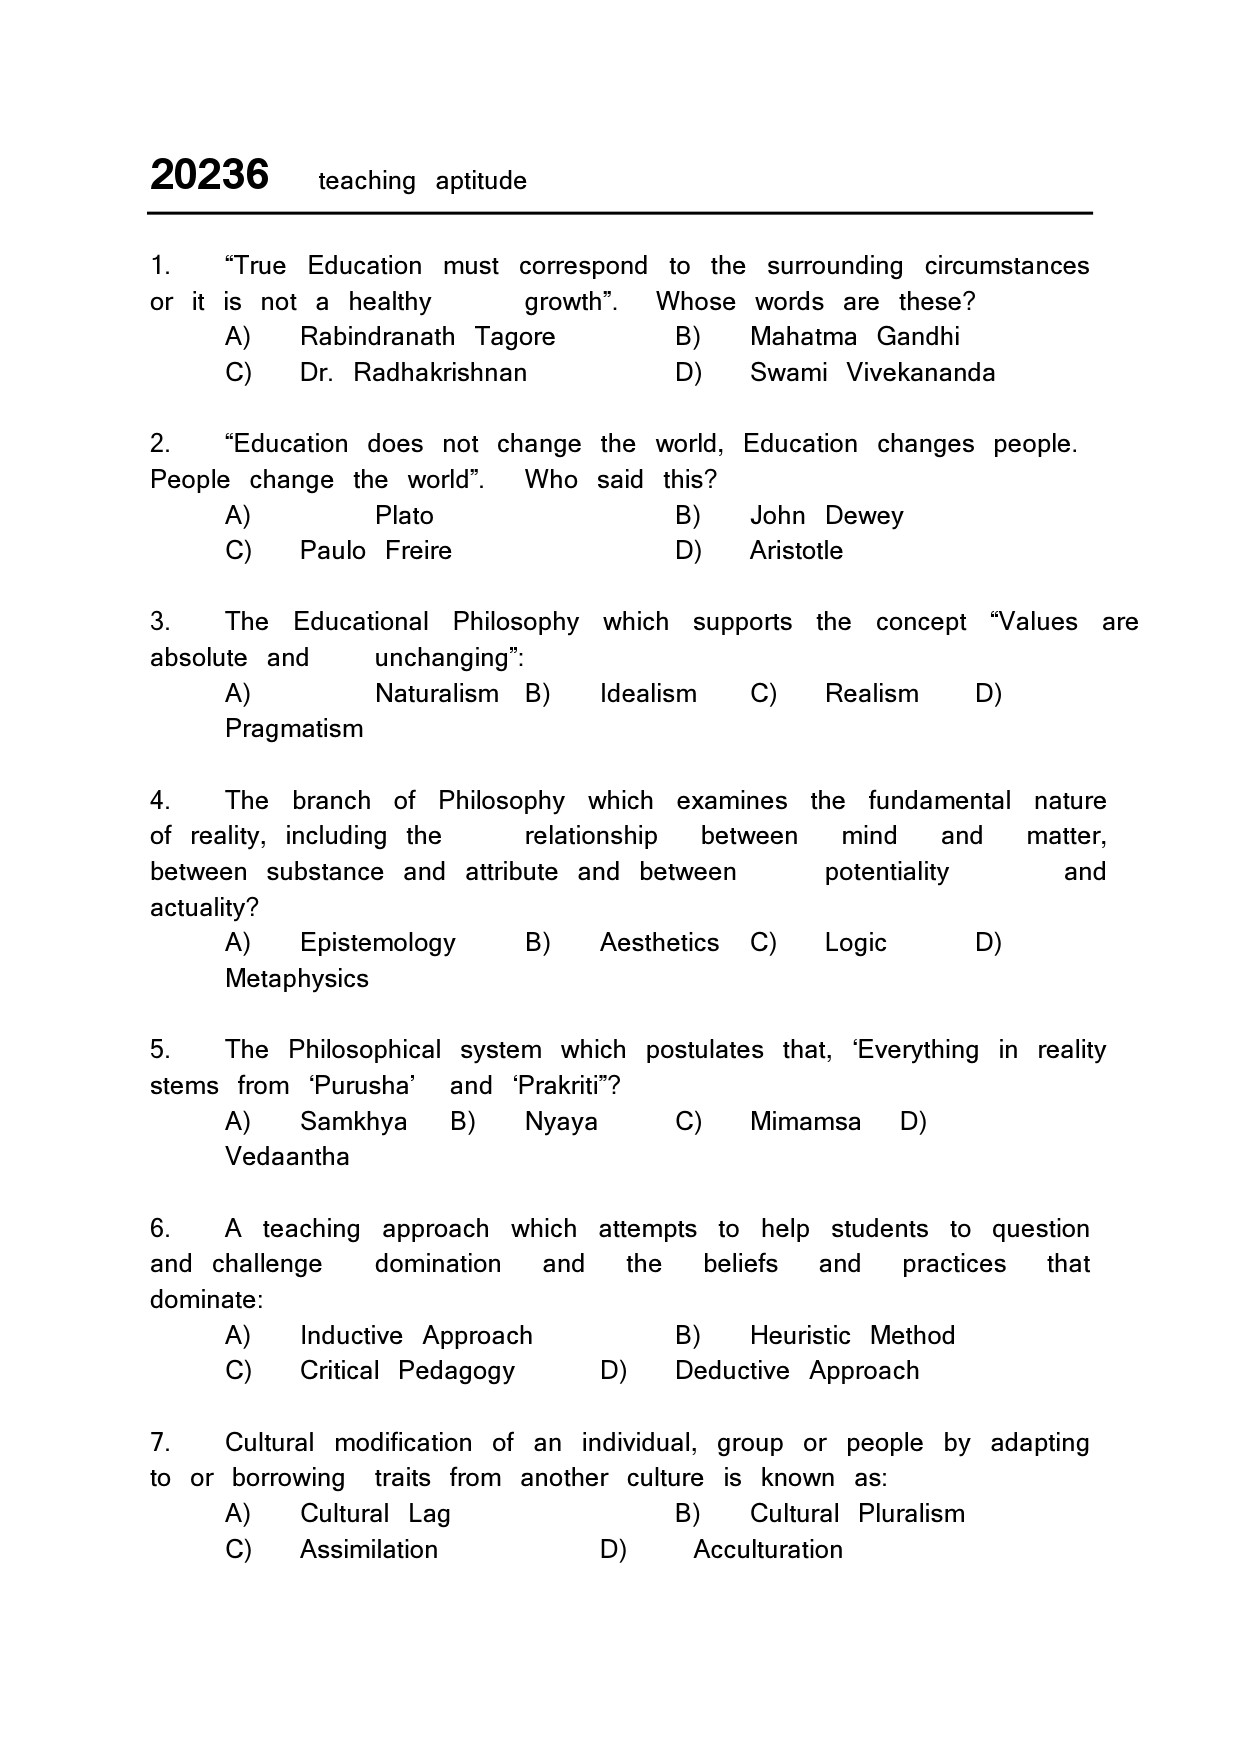 Kerala SET General Knowledge Exam Question Paper February 2020 1